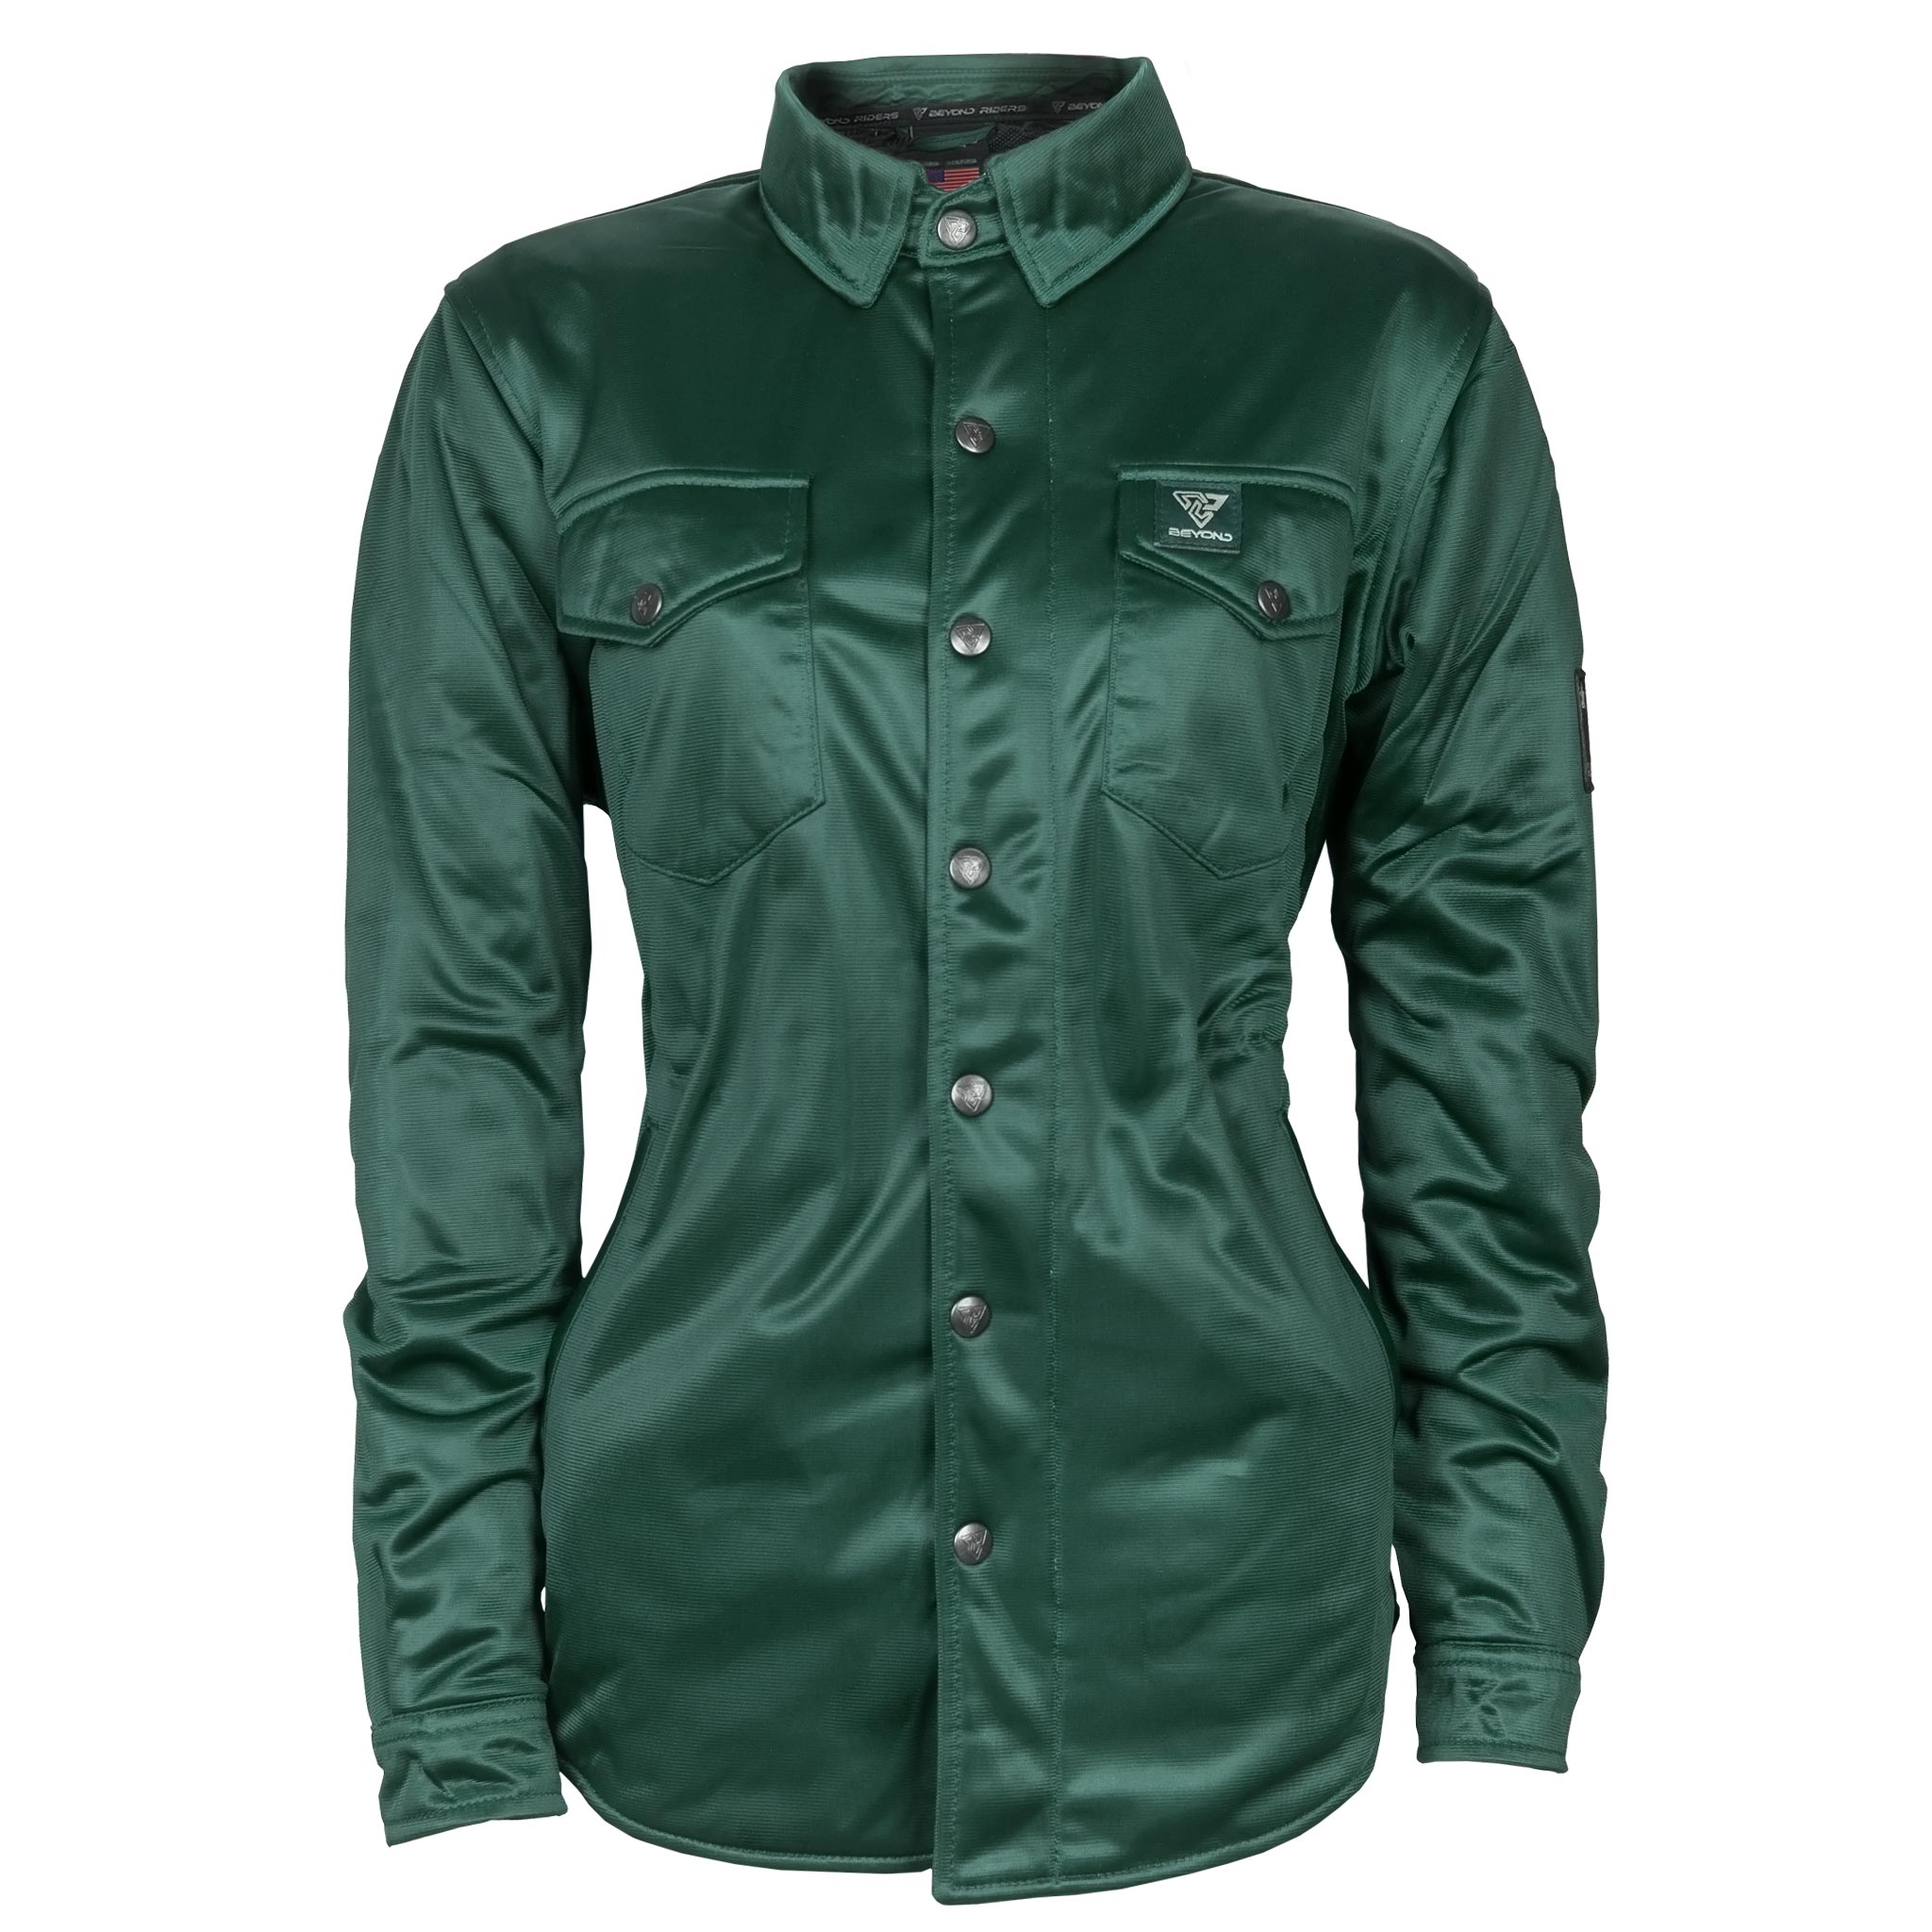 Ultra Protective Shirt for Women - Green Solid